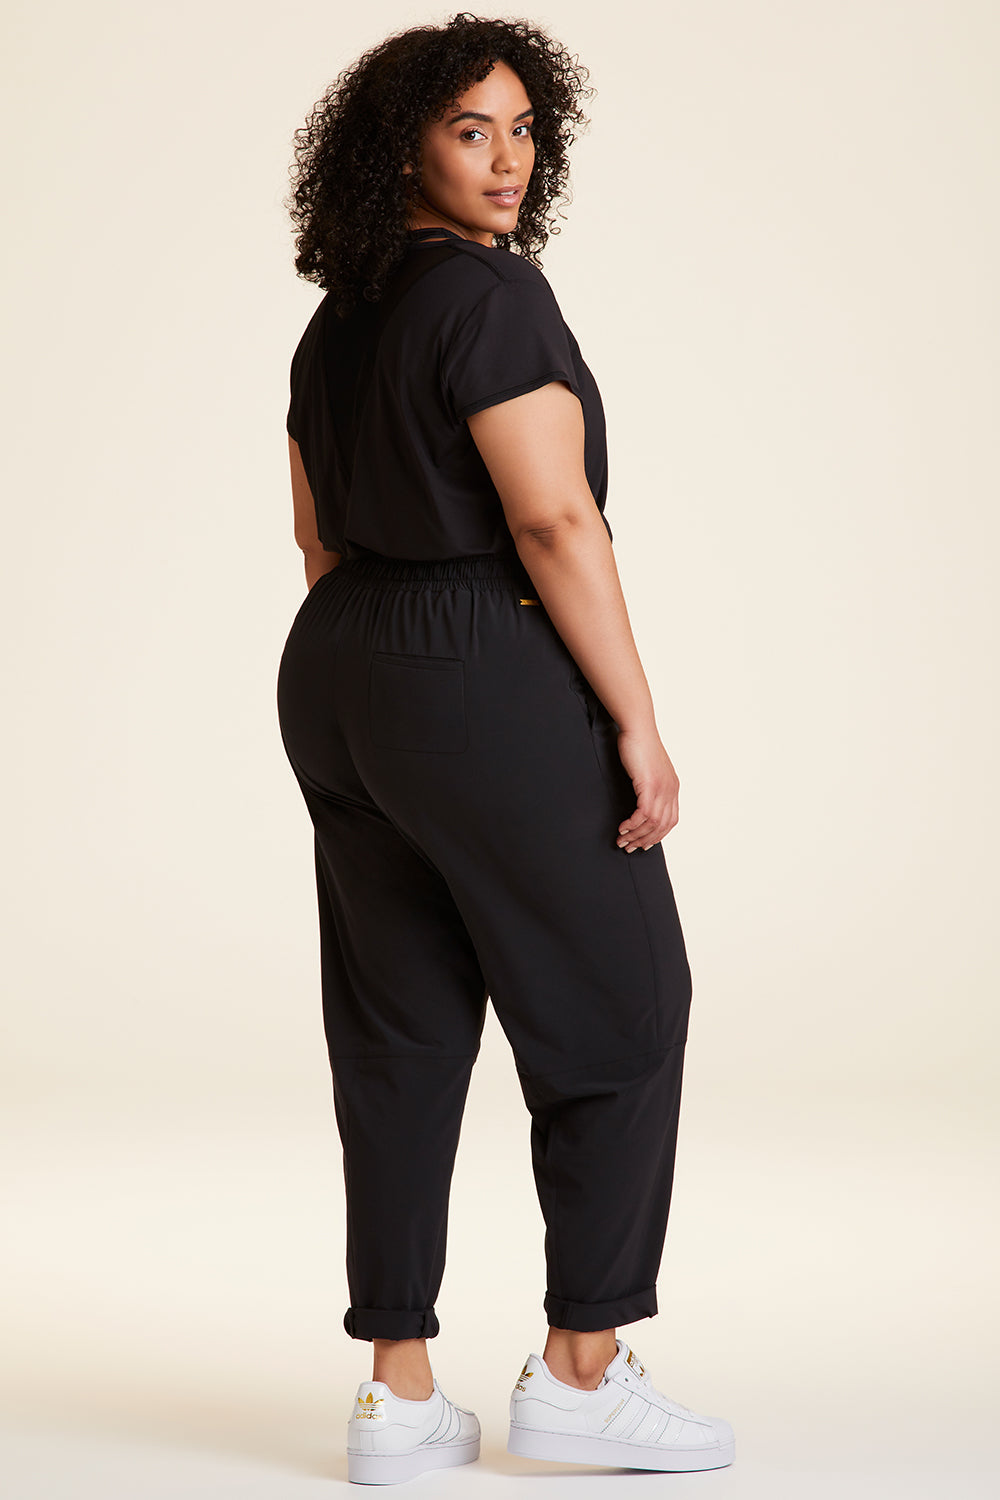 Womens Black Casual Pants - Bottoms, Clothing